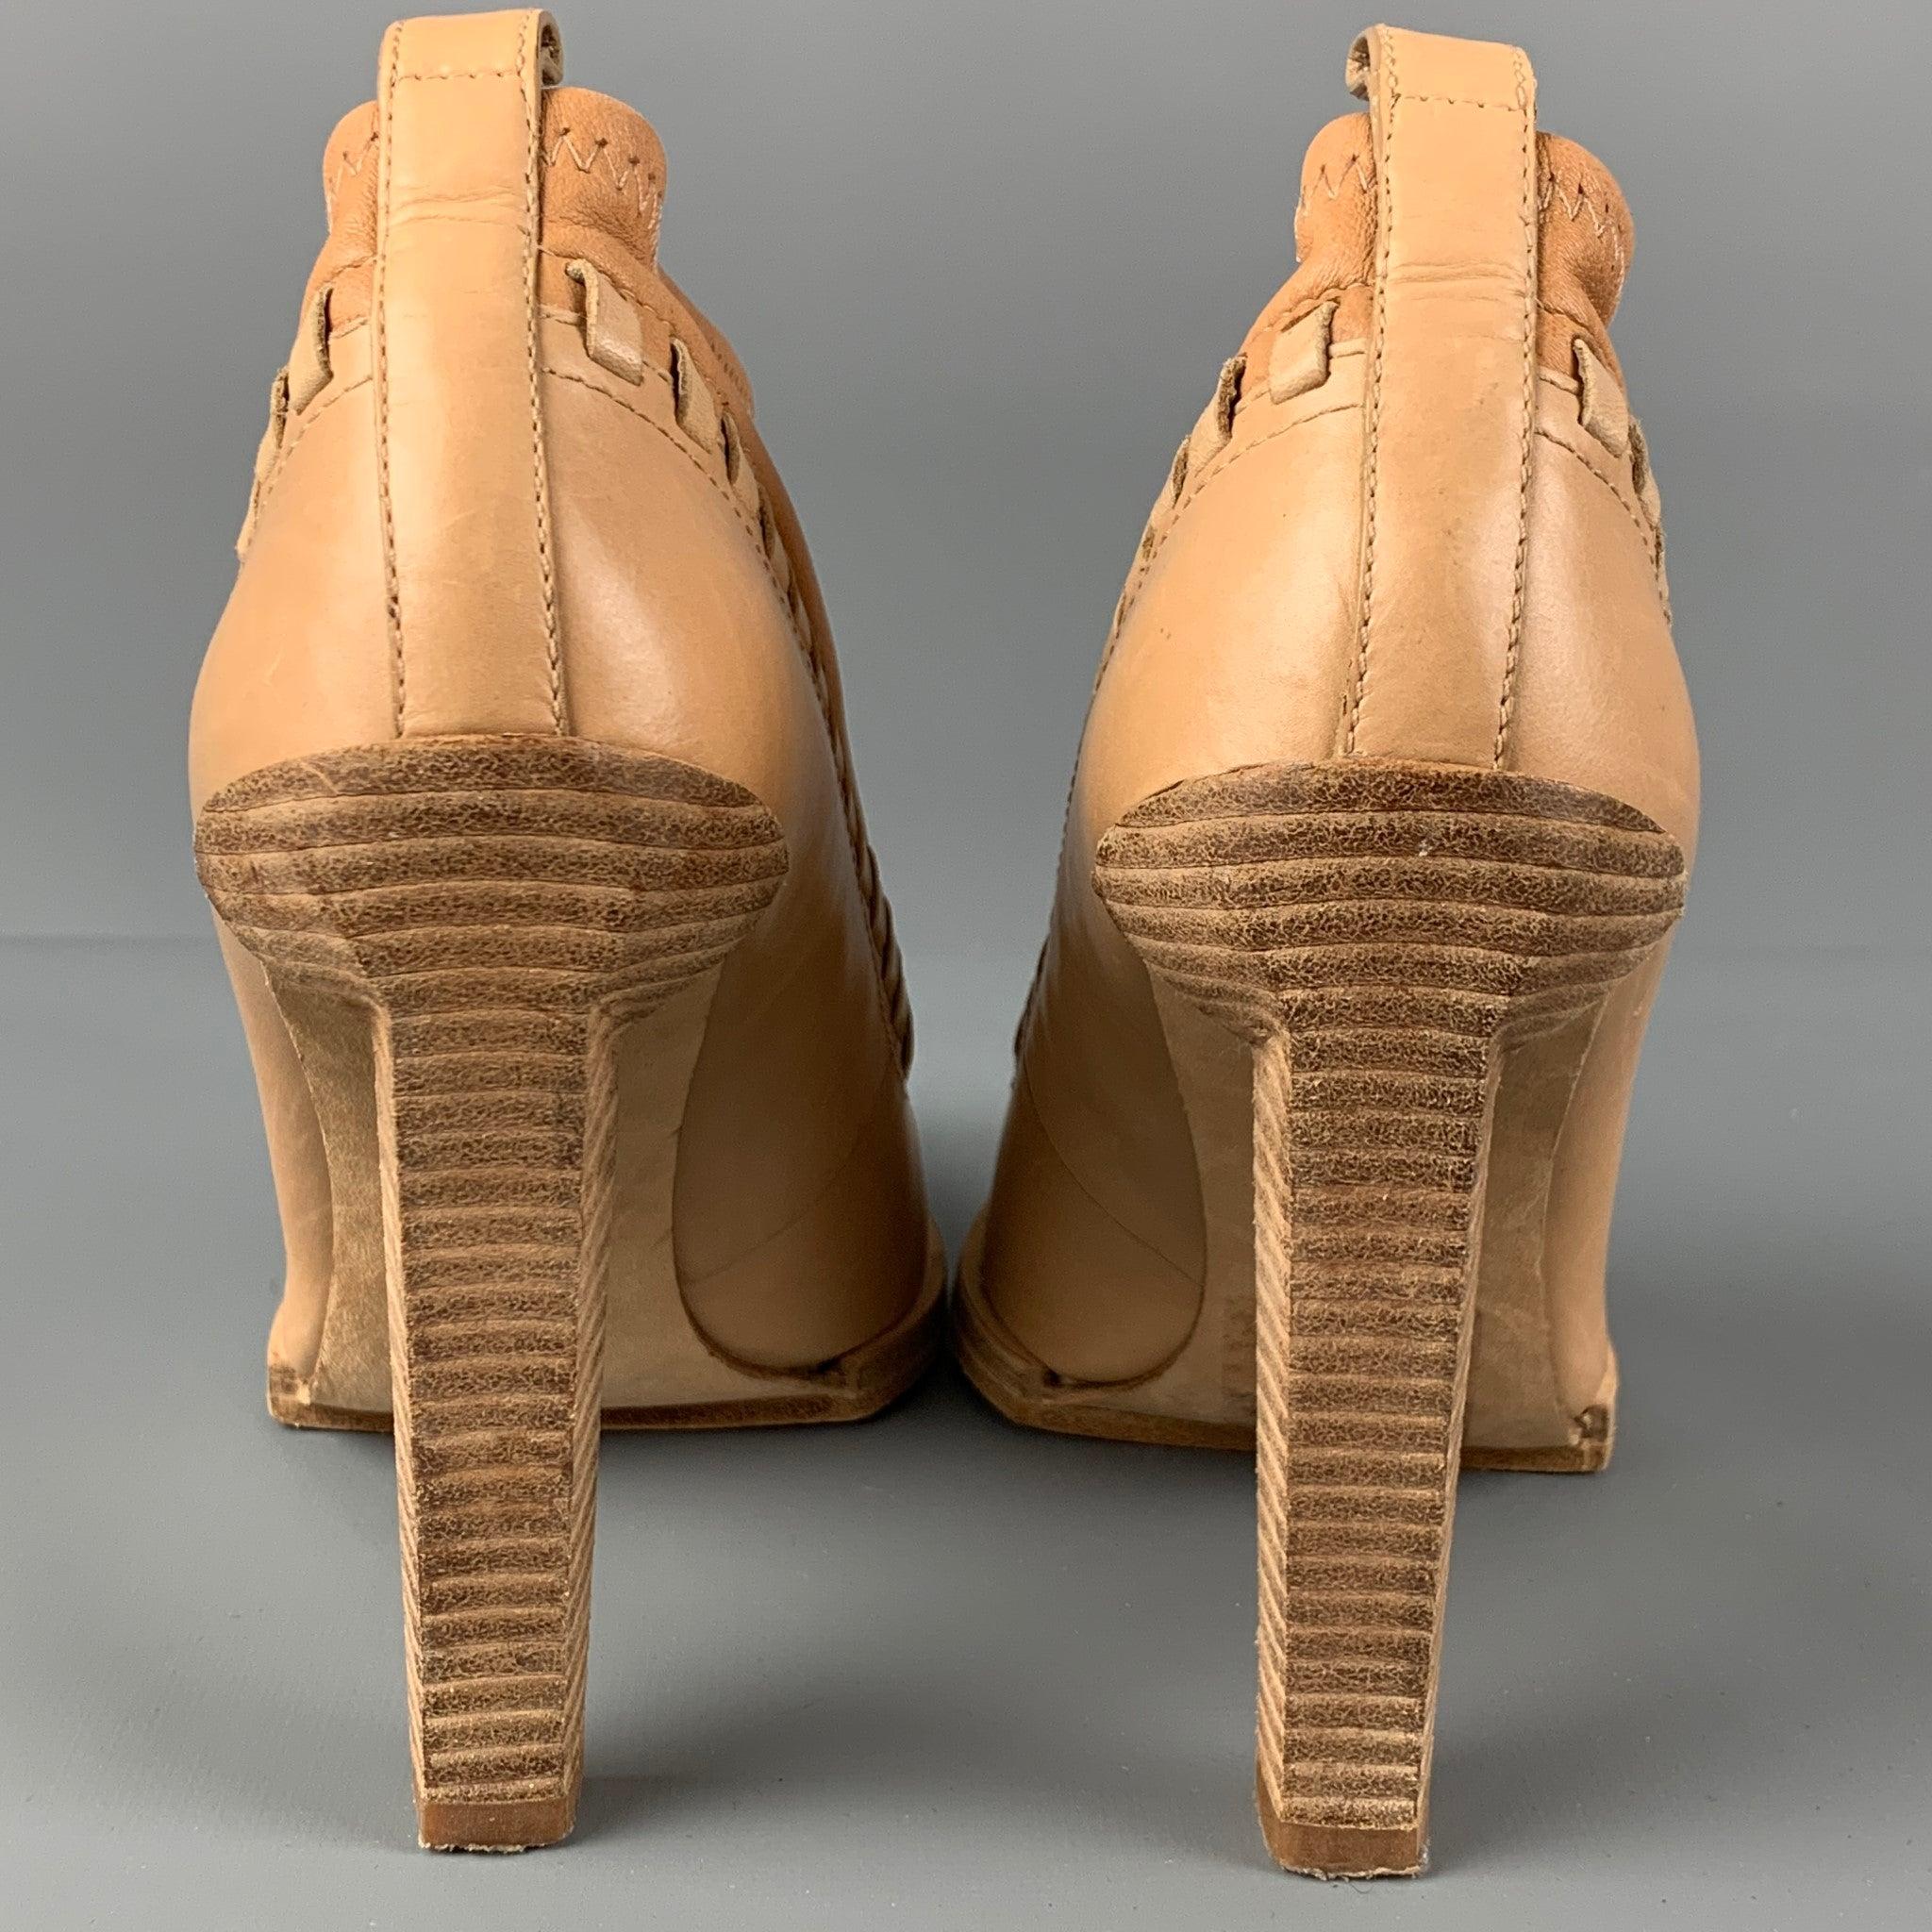 ALEXANDER WANG Size 8 Tan Leather Two Tone Pointed Toe Auguste Boots 1